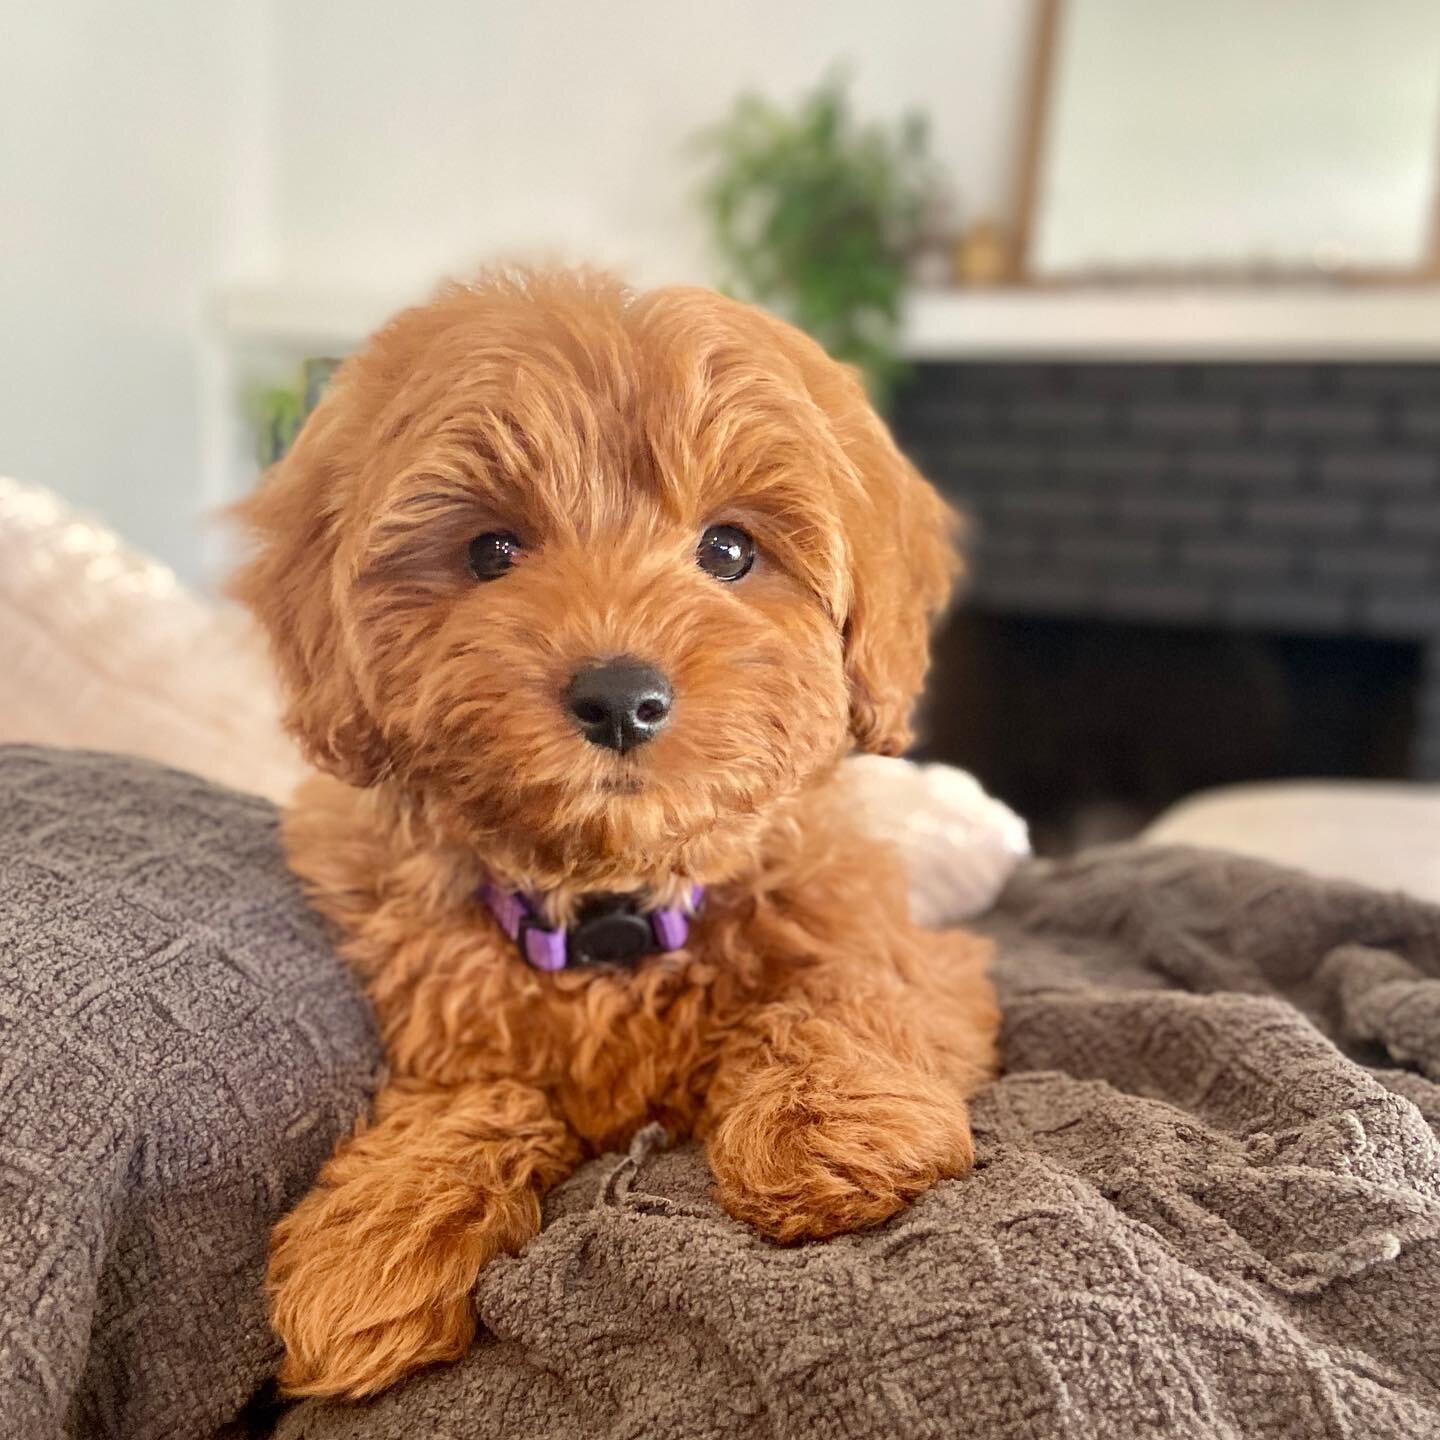 Hello friends! This sweet little nugget just joined our breeding program and will one day be a mama to our beautiful red mini goldendoodles ❤️. She is 9 weeks and just the cutest snuggle bug! Full grown she should be around 15lbs. Thank you @minidood